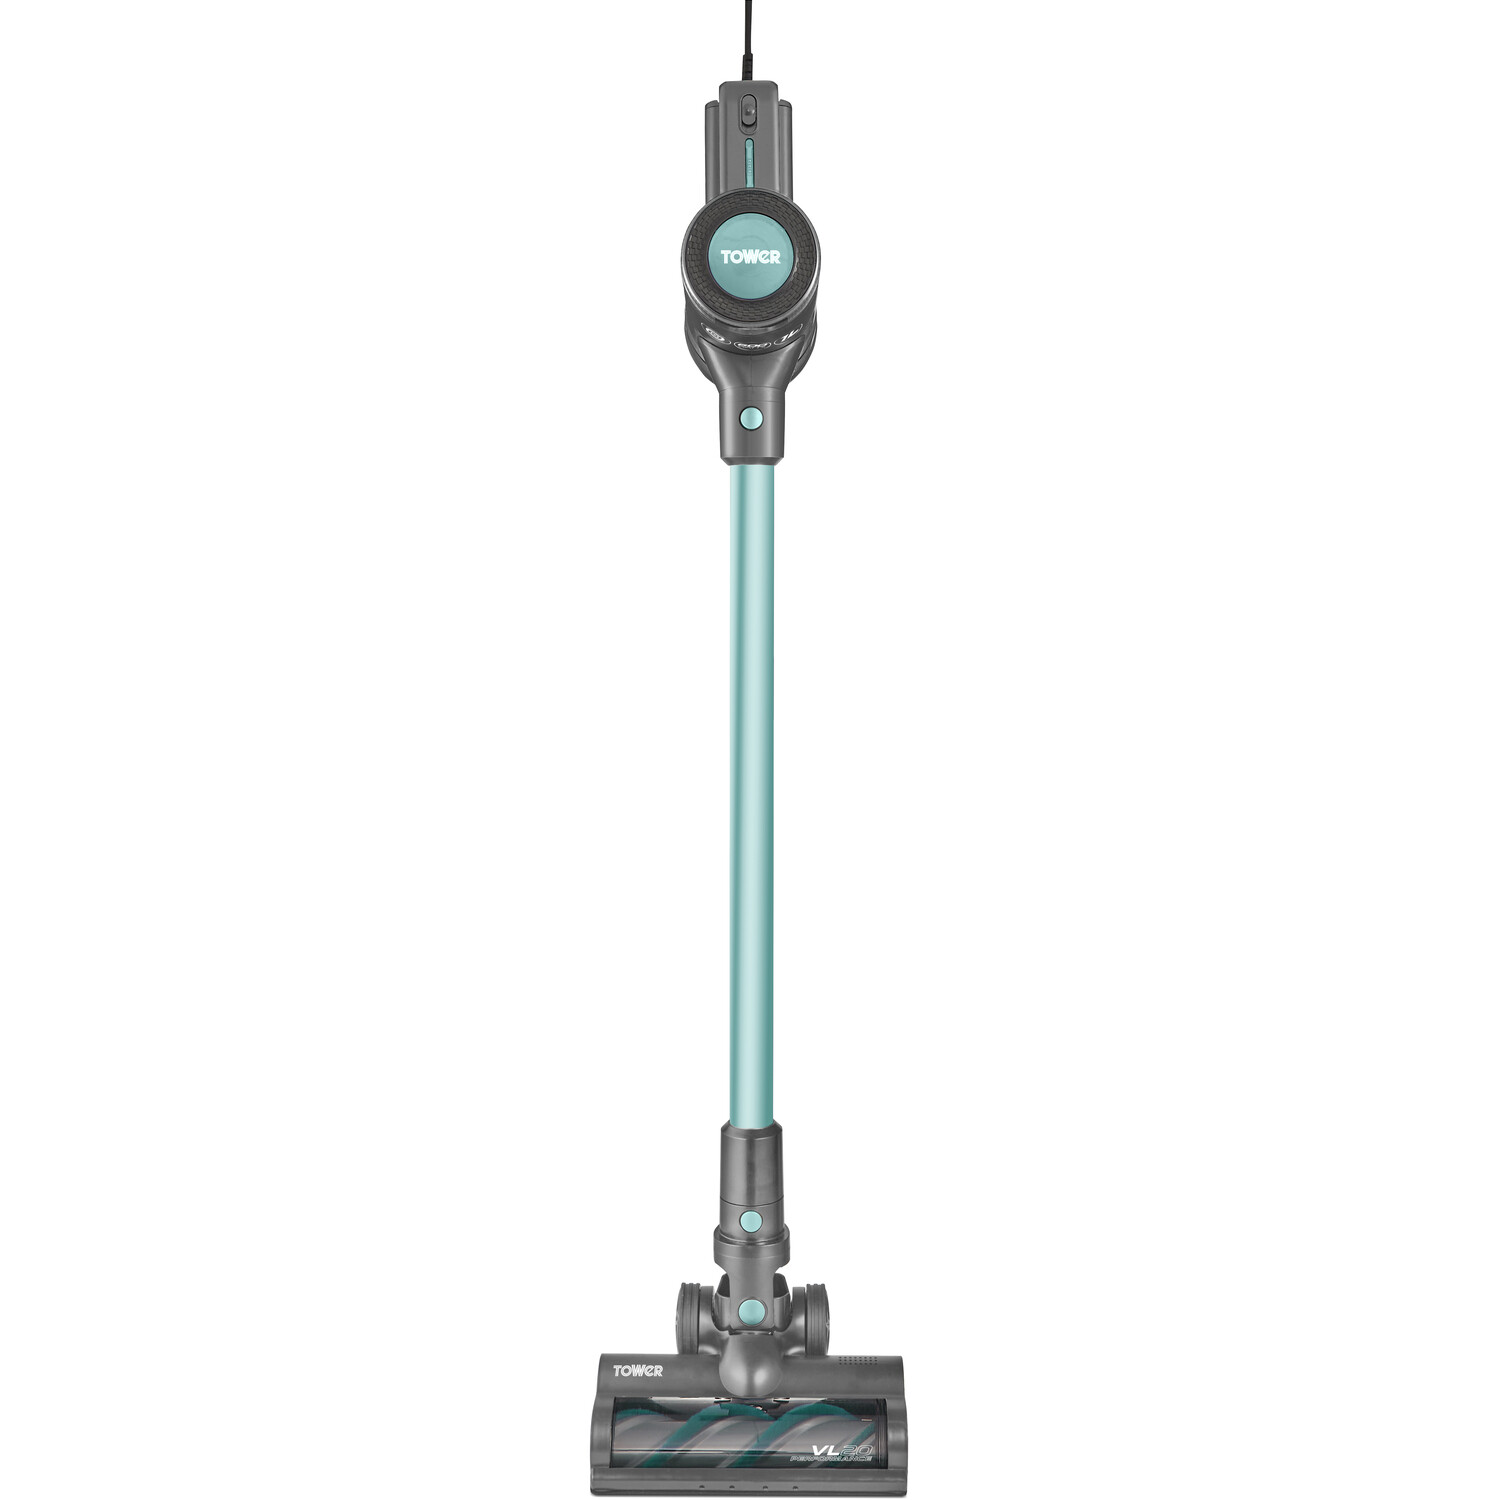 Tower VL20 Performance Corded Vacuum Cleaner with HEPA Filter 400W Image 3